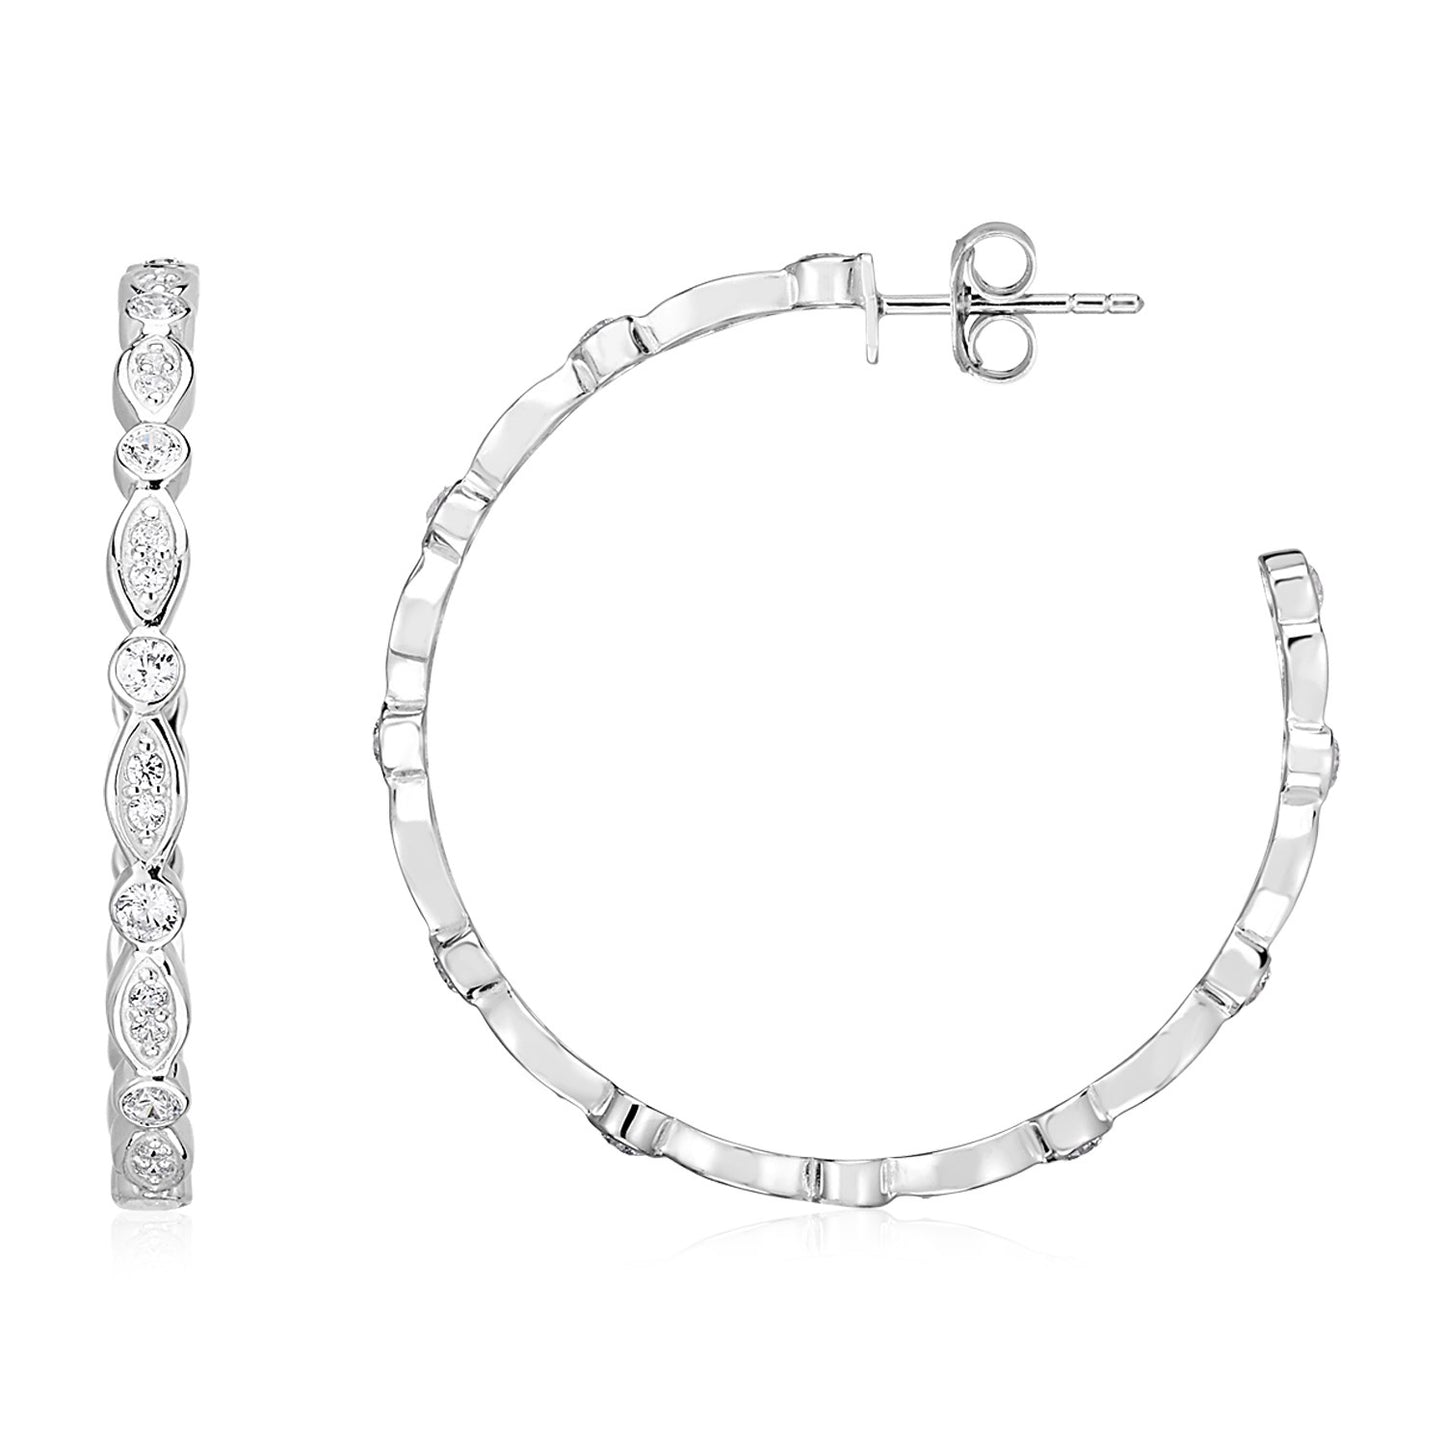 Sterling Silver Hoop Earrings with Round and Marquise Cubic Zirconias